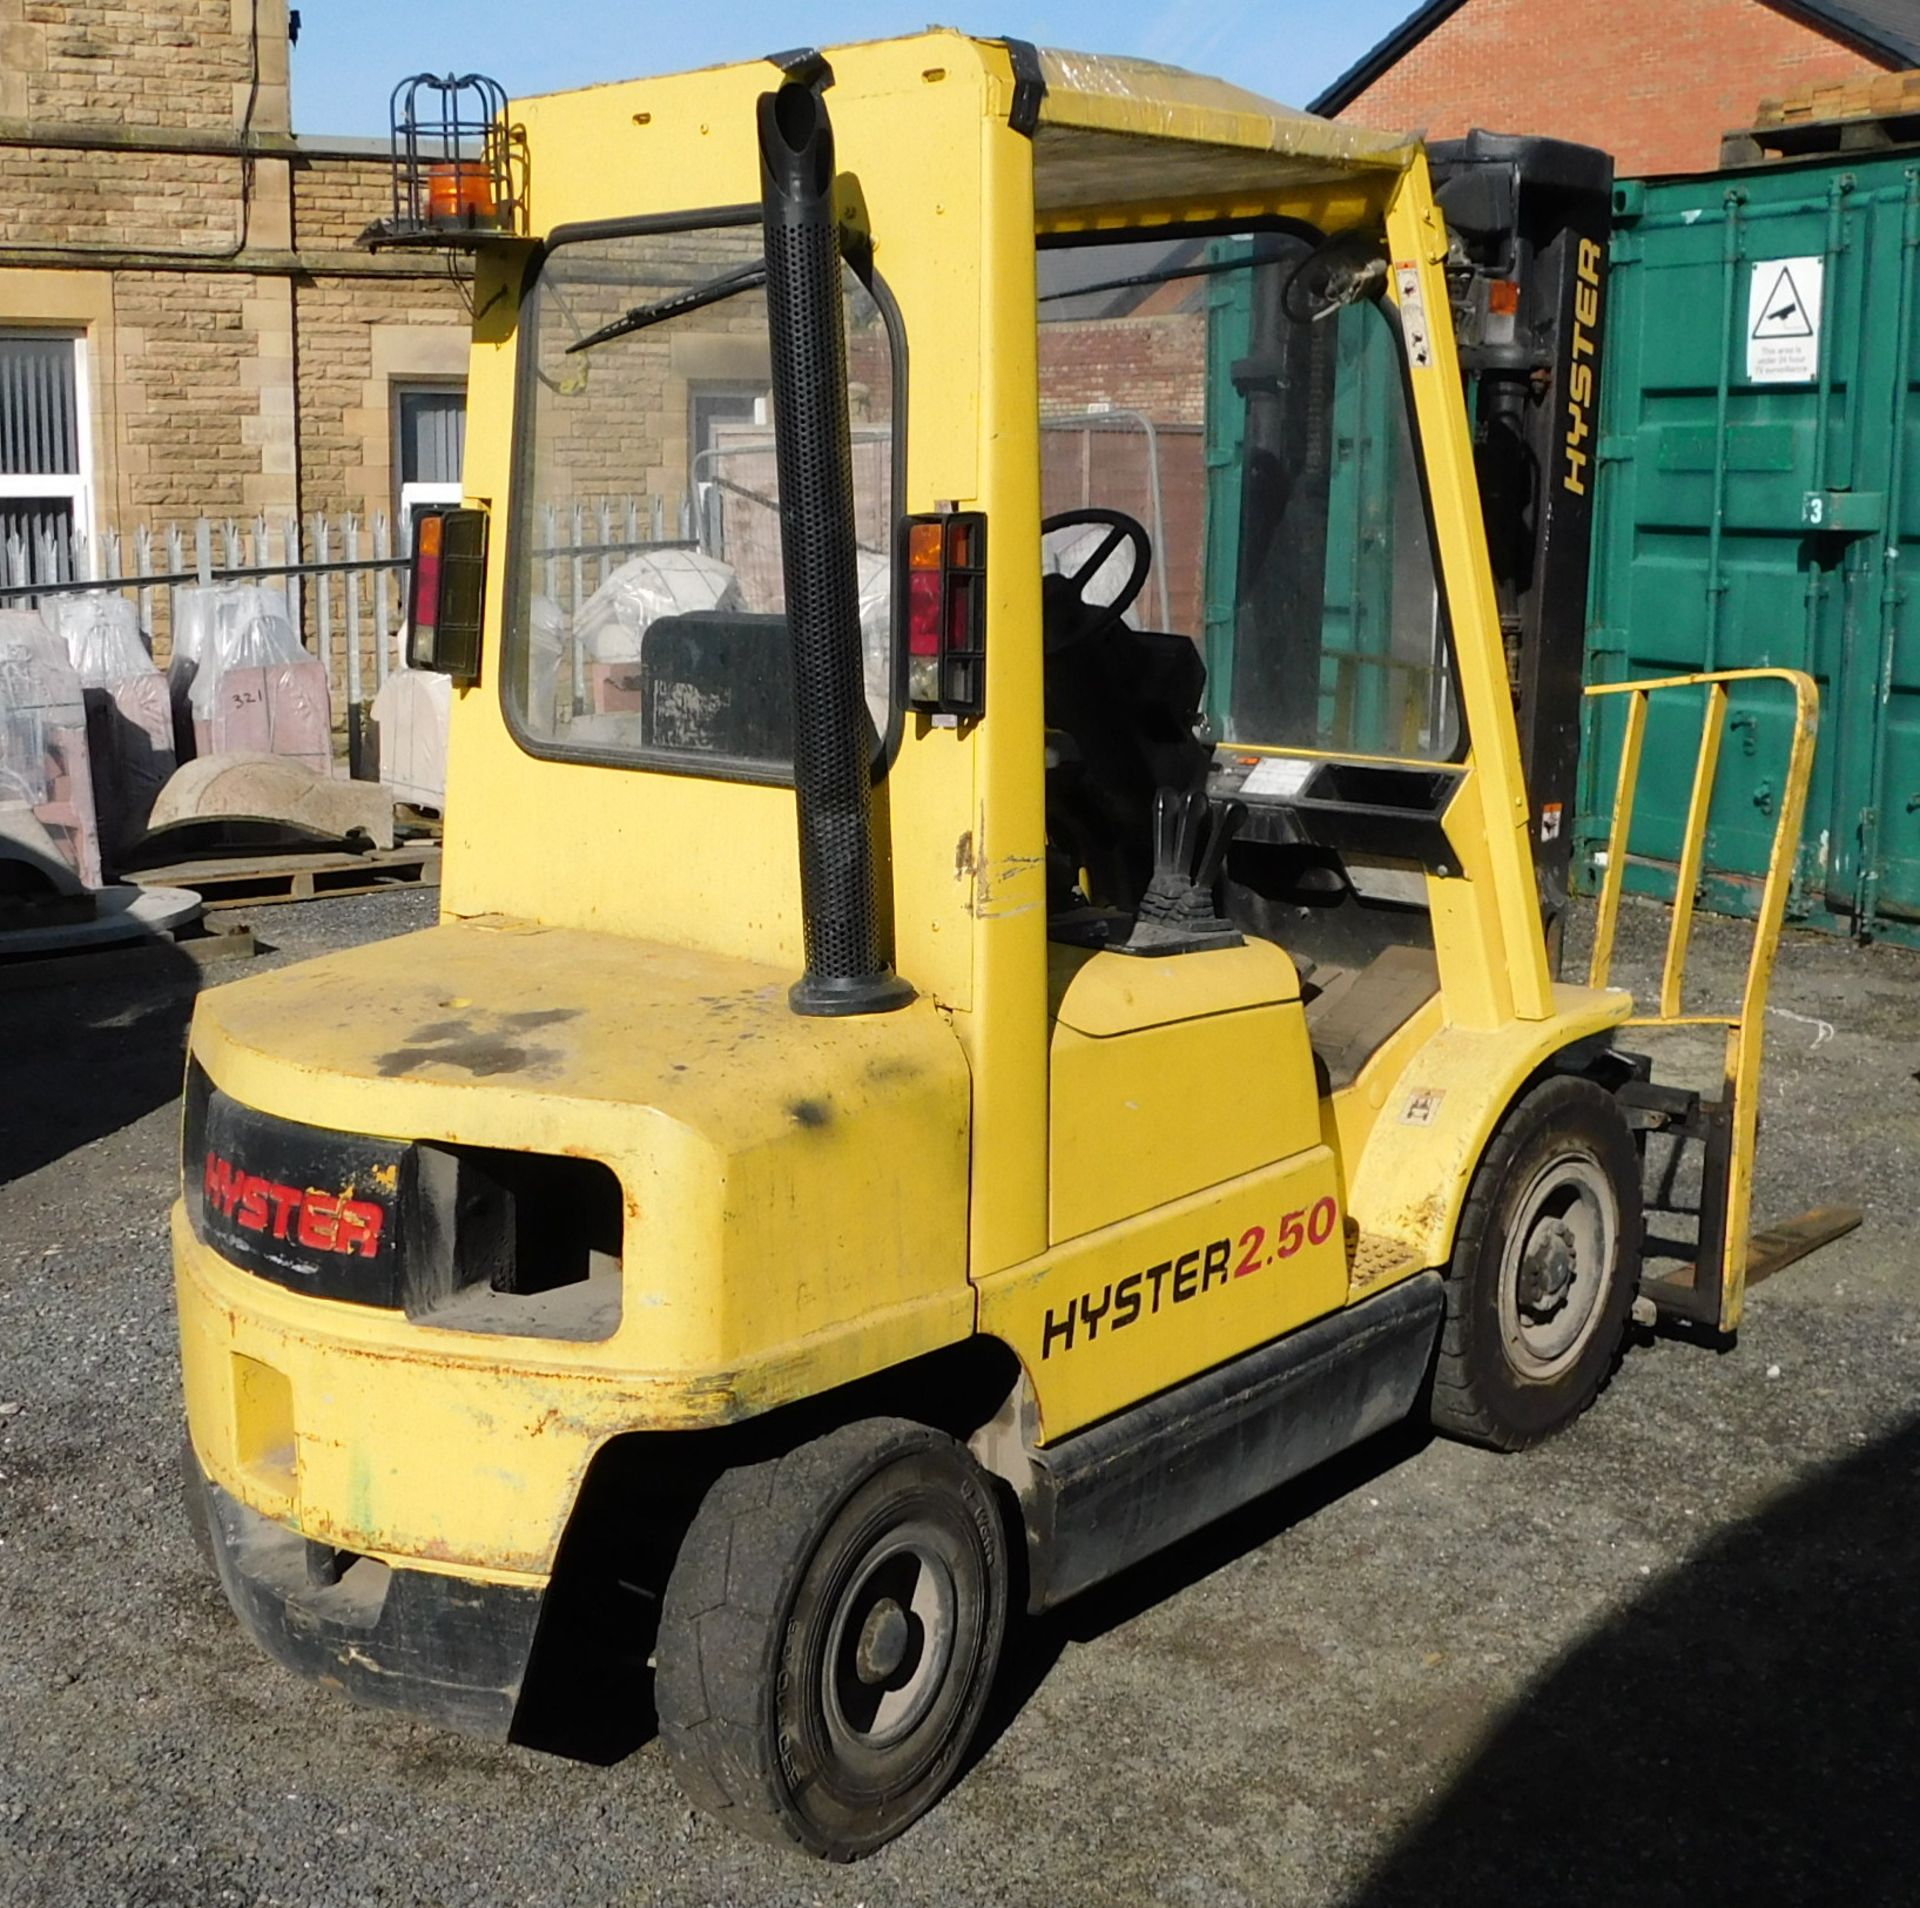 Hyster H2.50XM Diesel Forklift, H177B32597Z (2002), Capacity 2.5t (Collection Delayed Until - Image 3 of 7